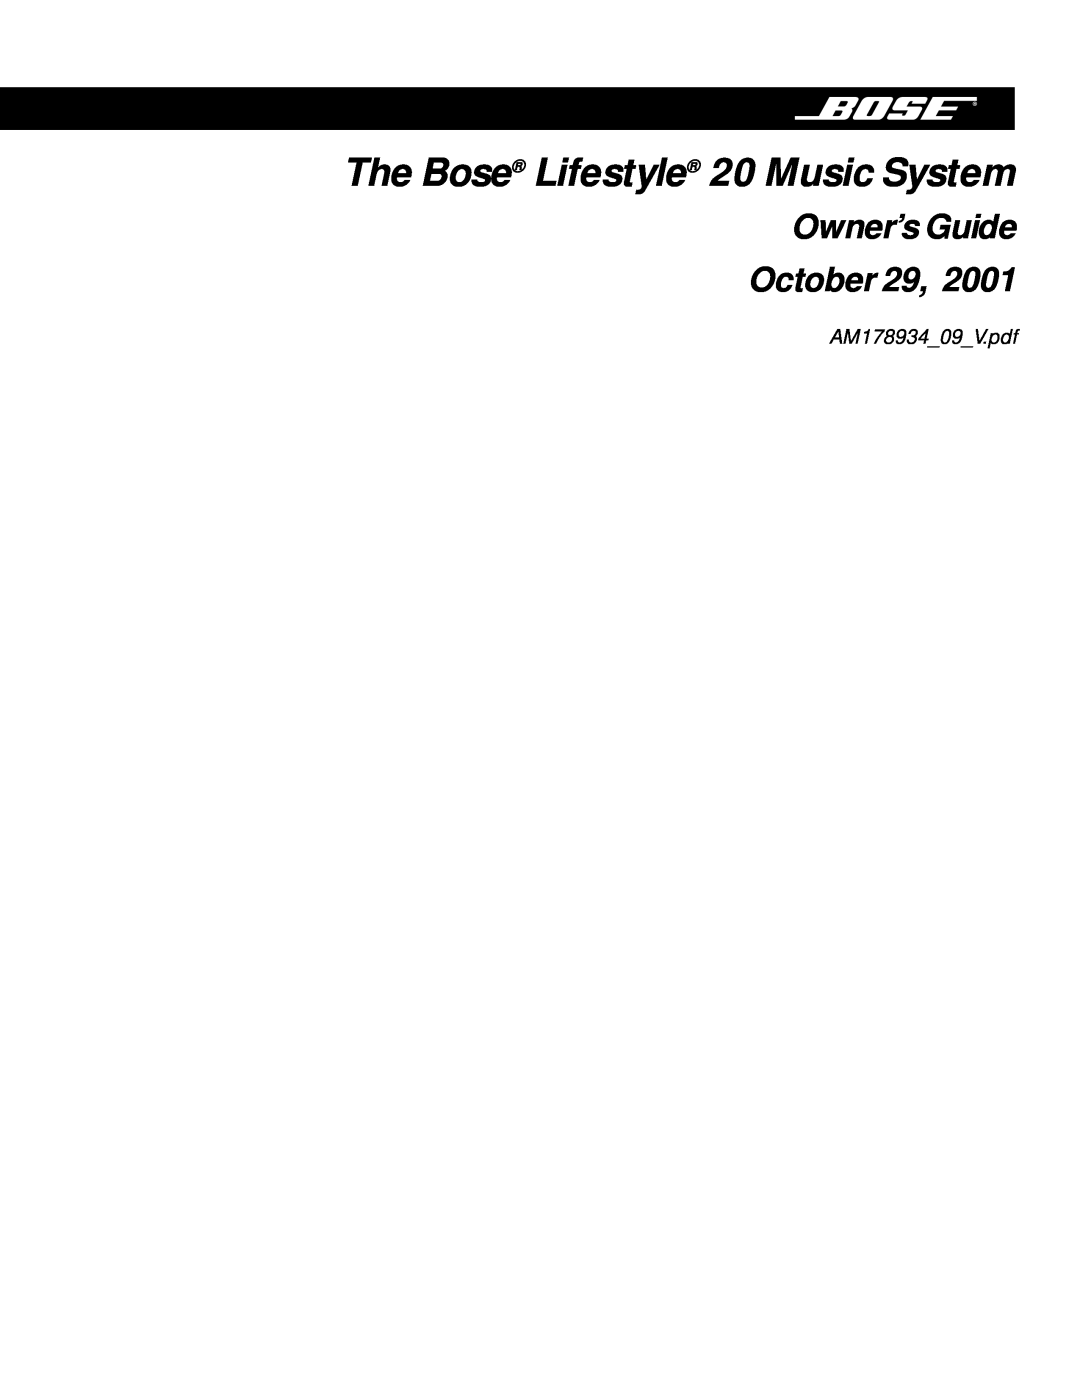 Bose manual The Bose Lifestyle 20 Music System, Owner’s Guide October 